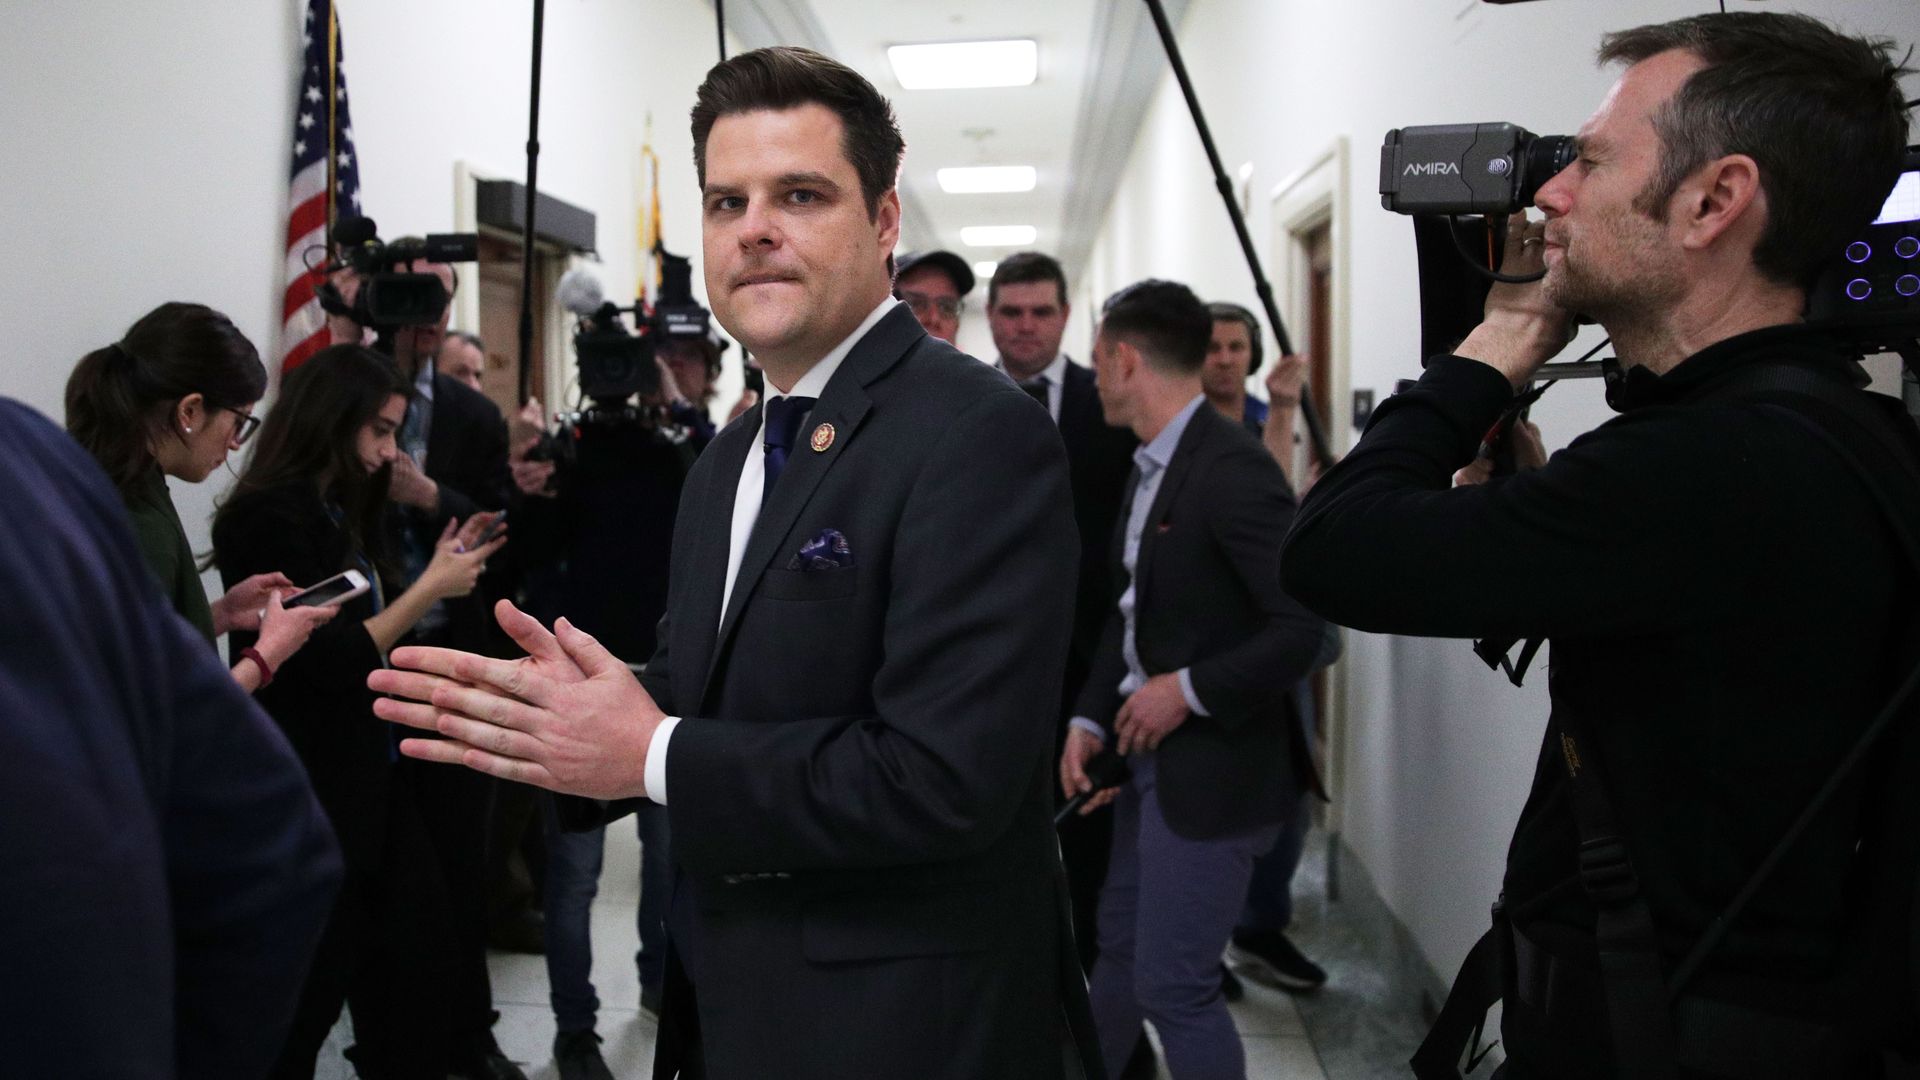 Rep. Matt Gaetz of Florida is seen surrounded by the media in a Capitol Hill hallway.